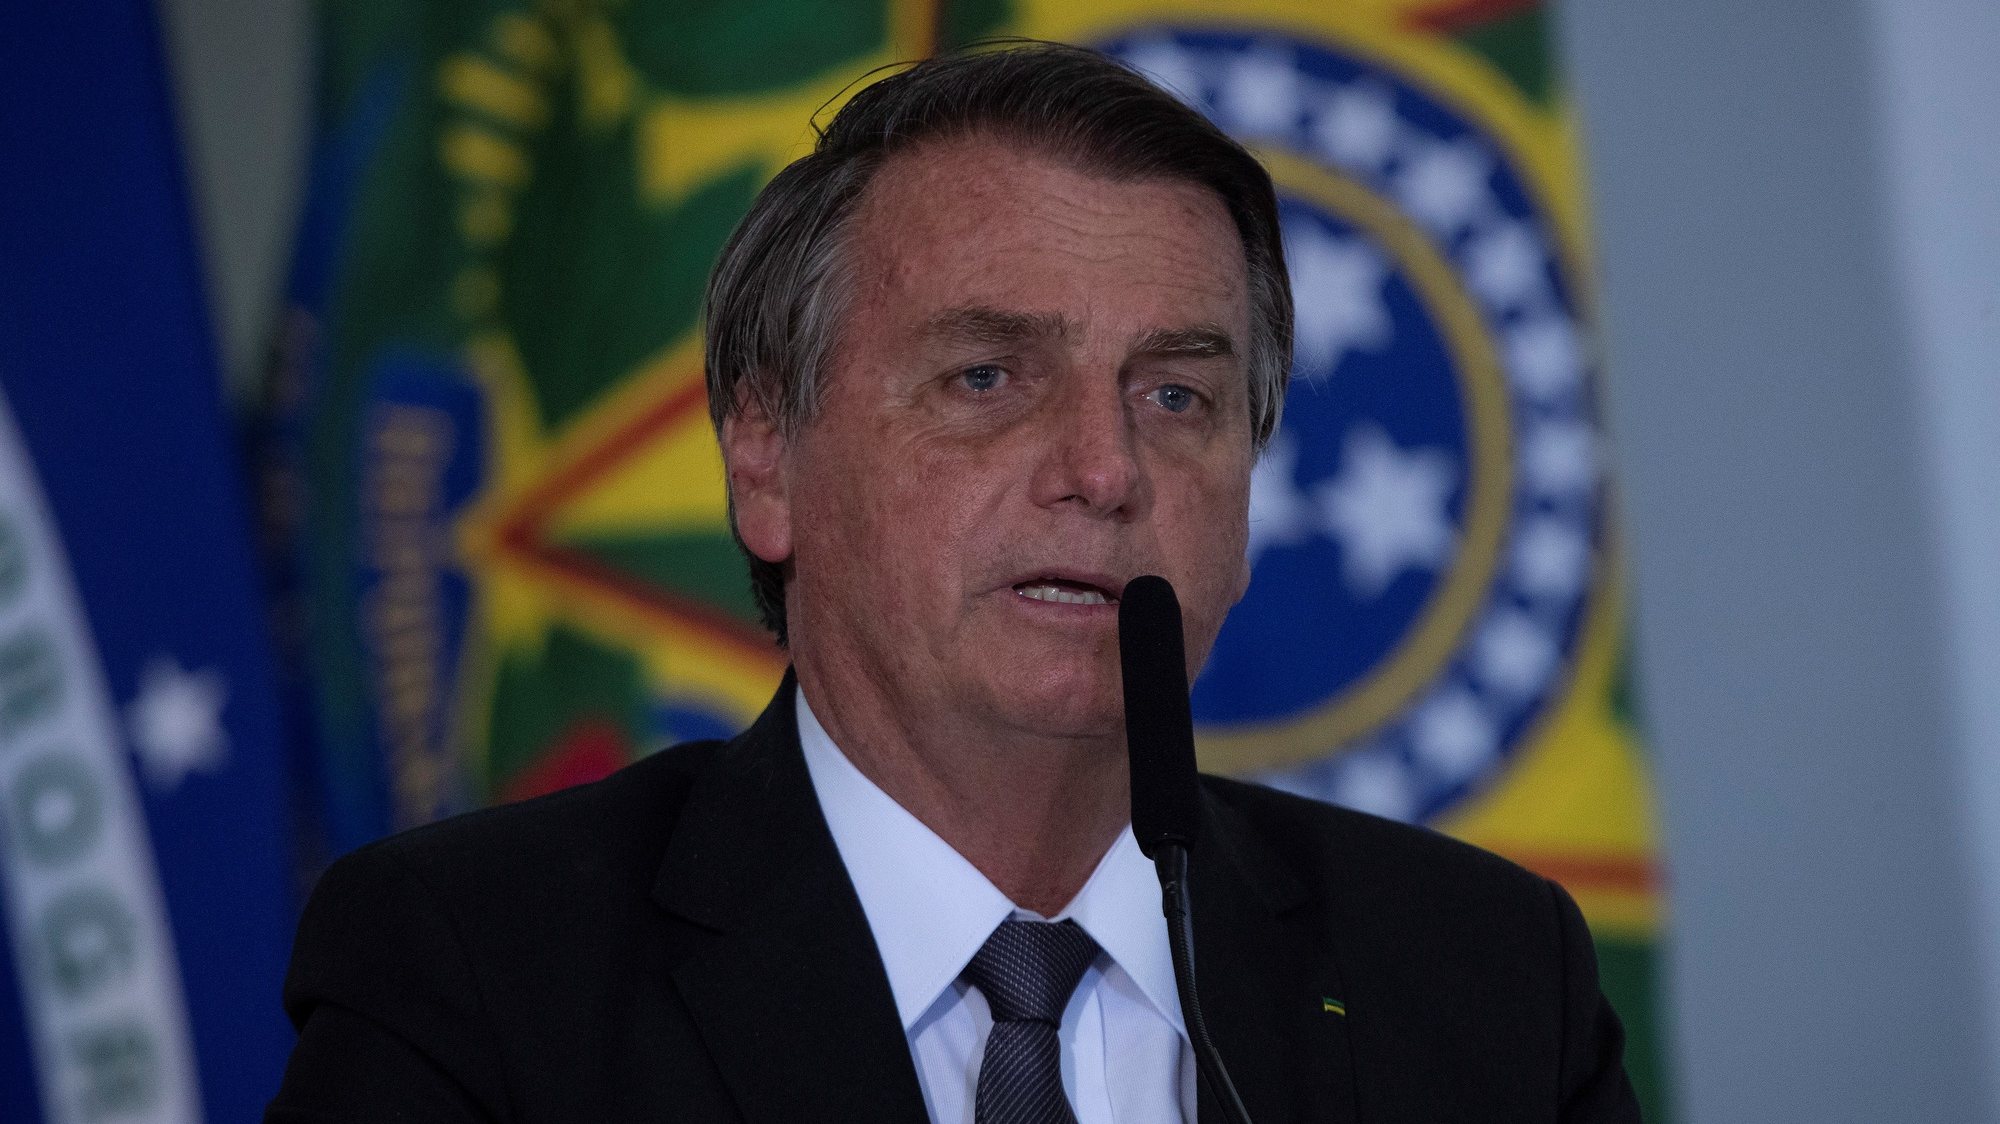 epa09343165 The President of Brazil, Jair Bolsonaro, speaks during the sanction ceremony of the Eletrobras Capitalization Law, at the Planalto Palace in Brasilia, Brazil, 13 July 2021. Bolsonaro sanctioned with some vetoes the Provisional Measure that regulates the privatization process of the state giant Eletrobras, the largest electricity company in Latin America, according to the Official Gazette of the Union published on 13 July.  EPA/Joedson Alves